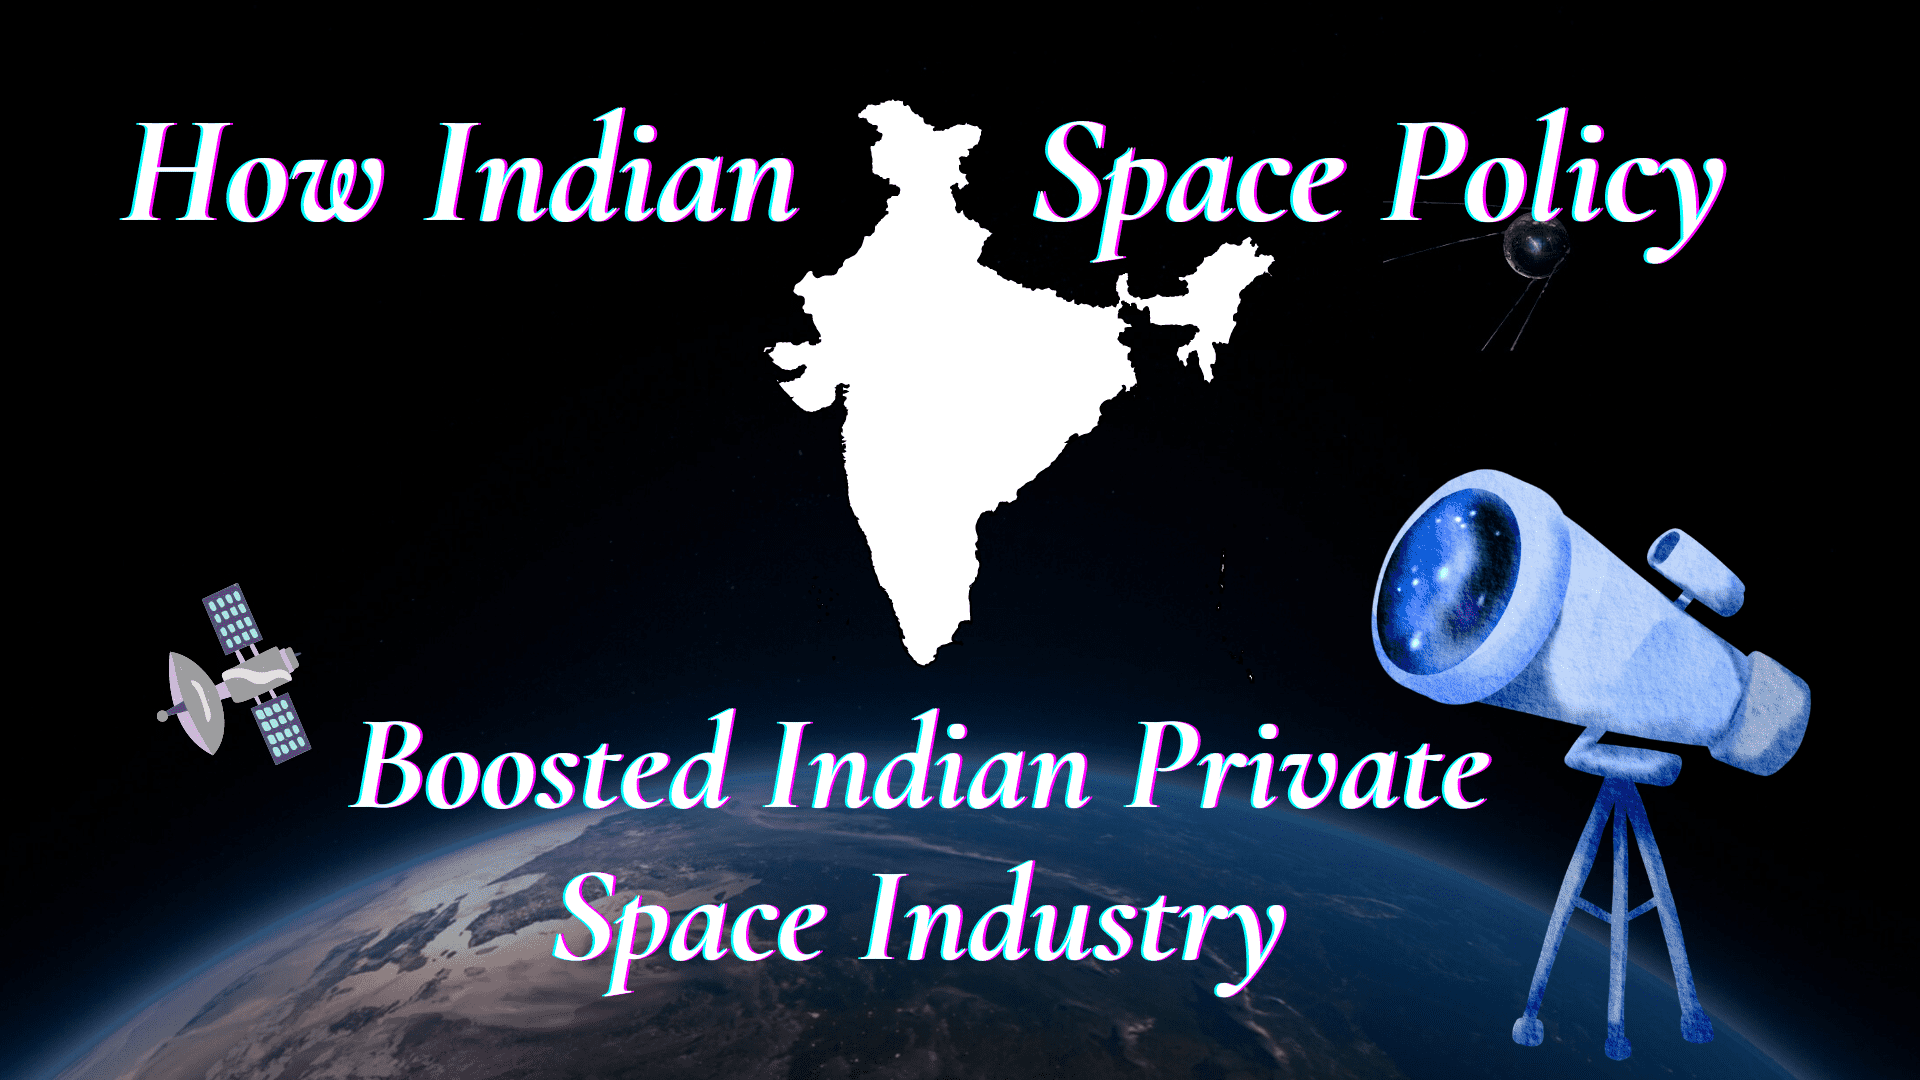 Indian space policy 2023 boosted Indian Space private industry